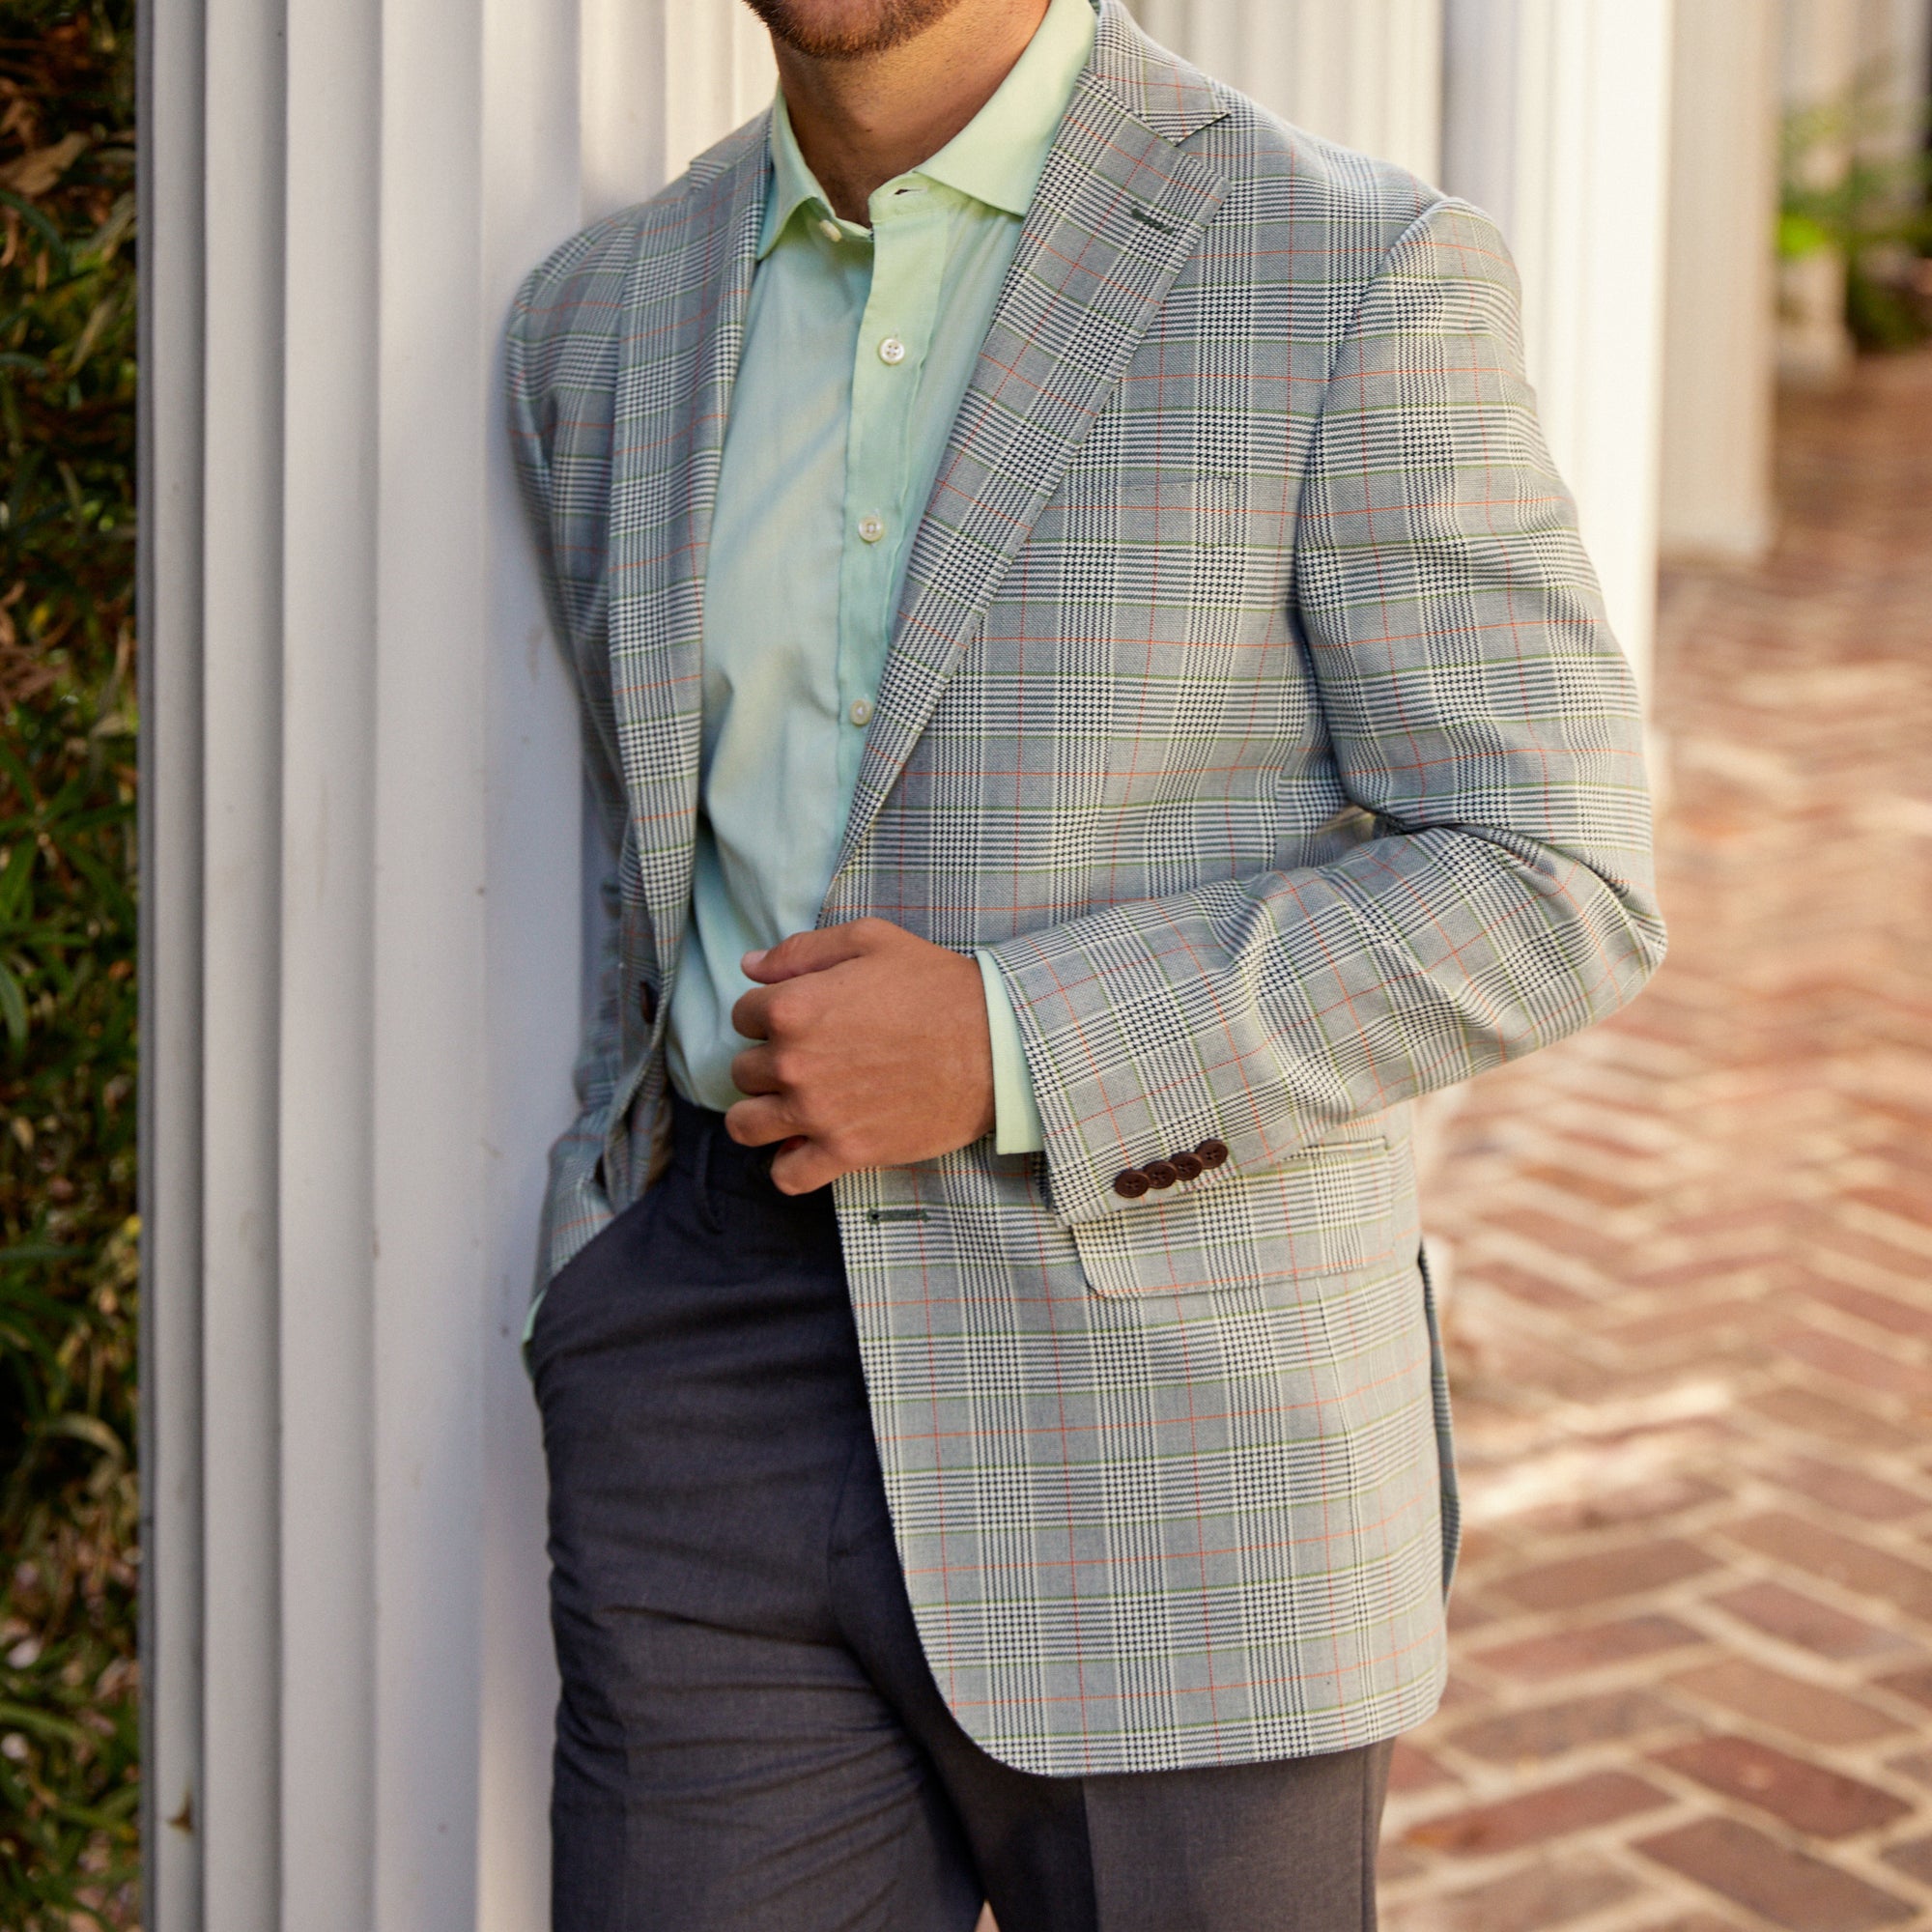 Like a rare single malt, this rare green base can hang with you in the Highlands or the mossy South. Lightweight construction and 100% cotton keep this look preppy without being stuffy.